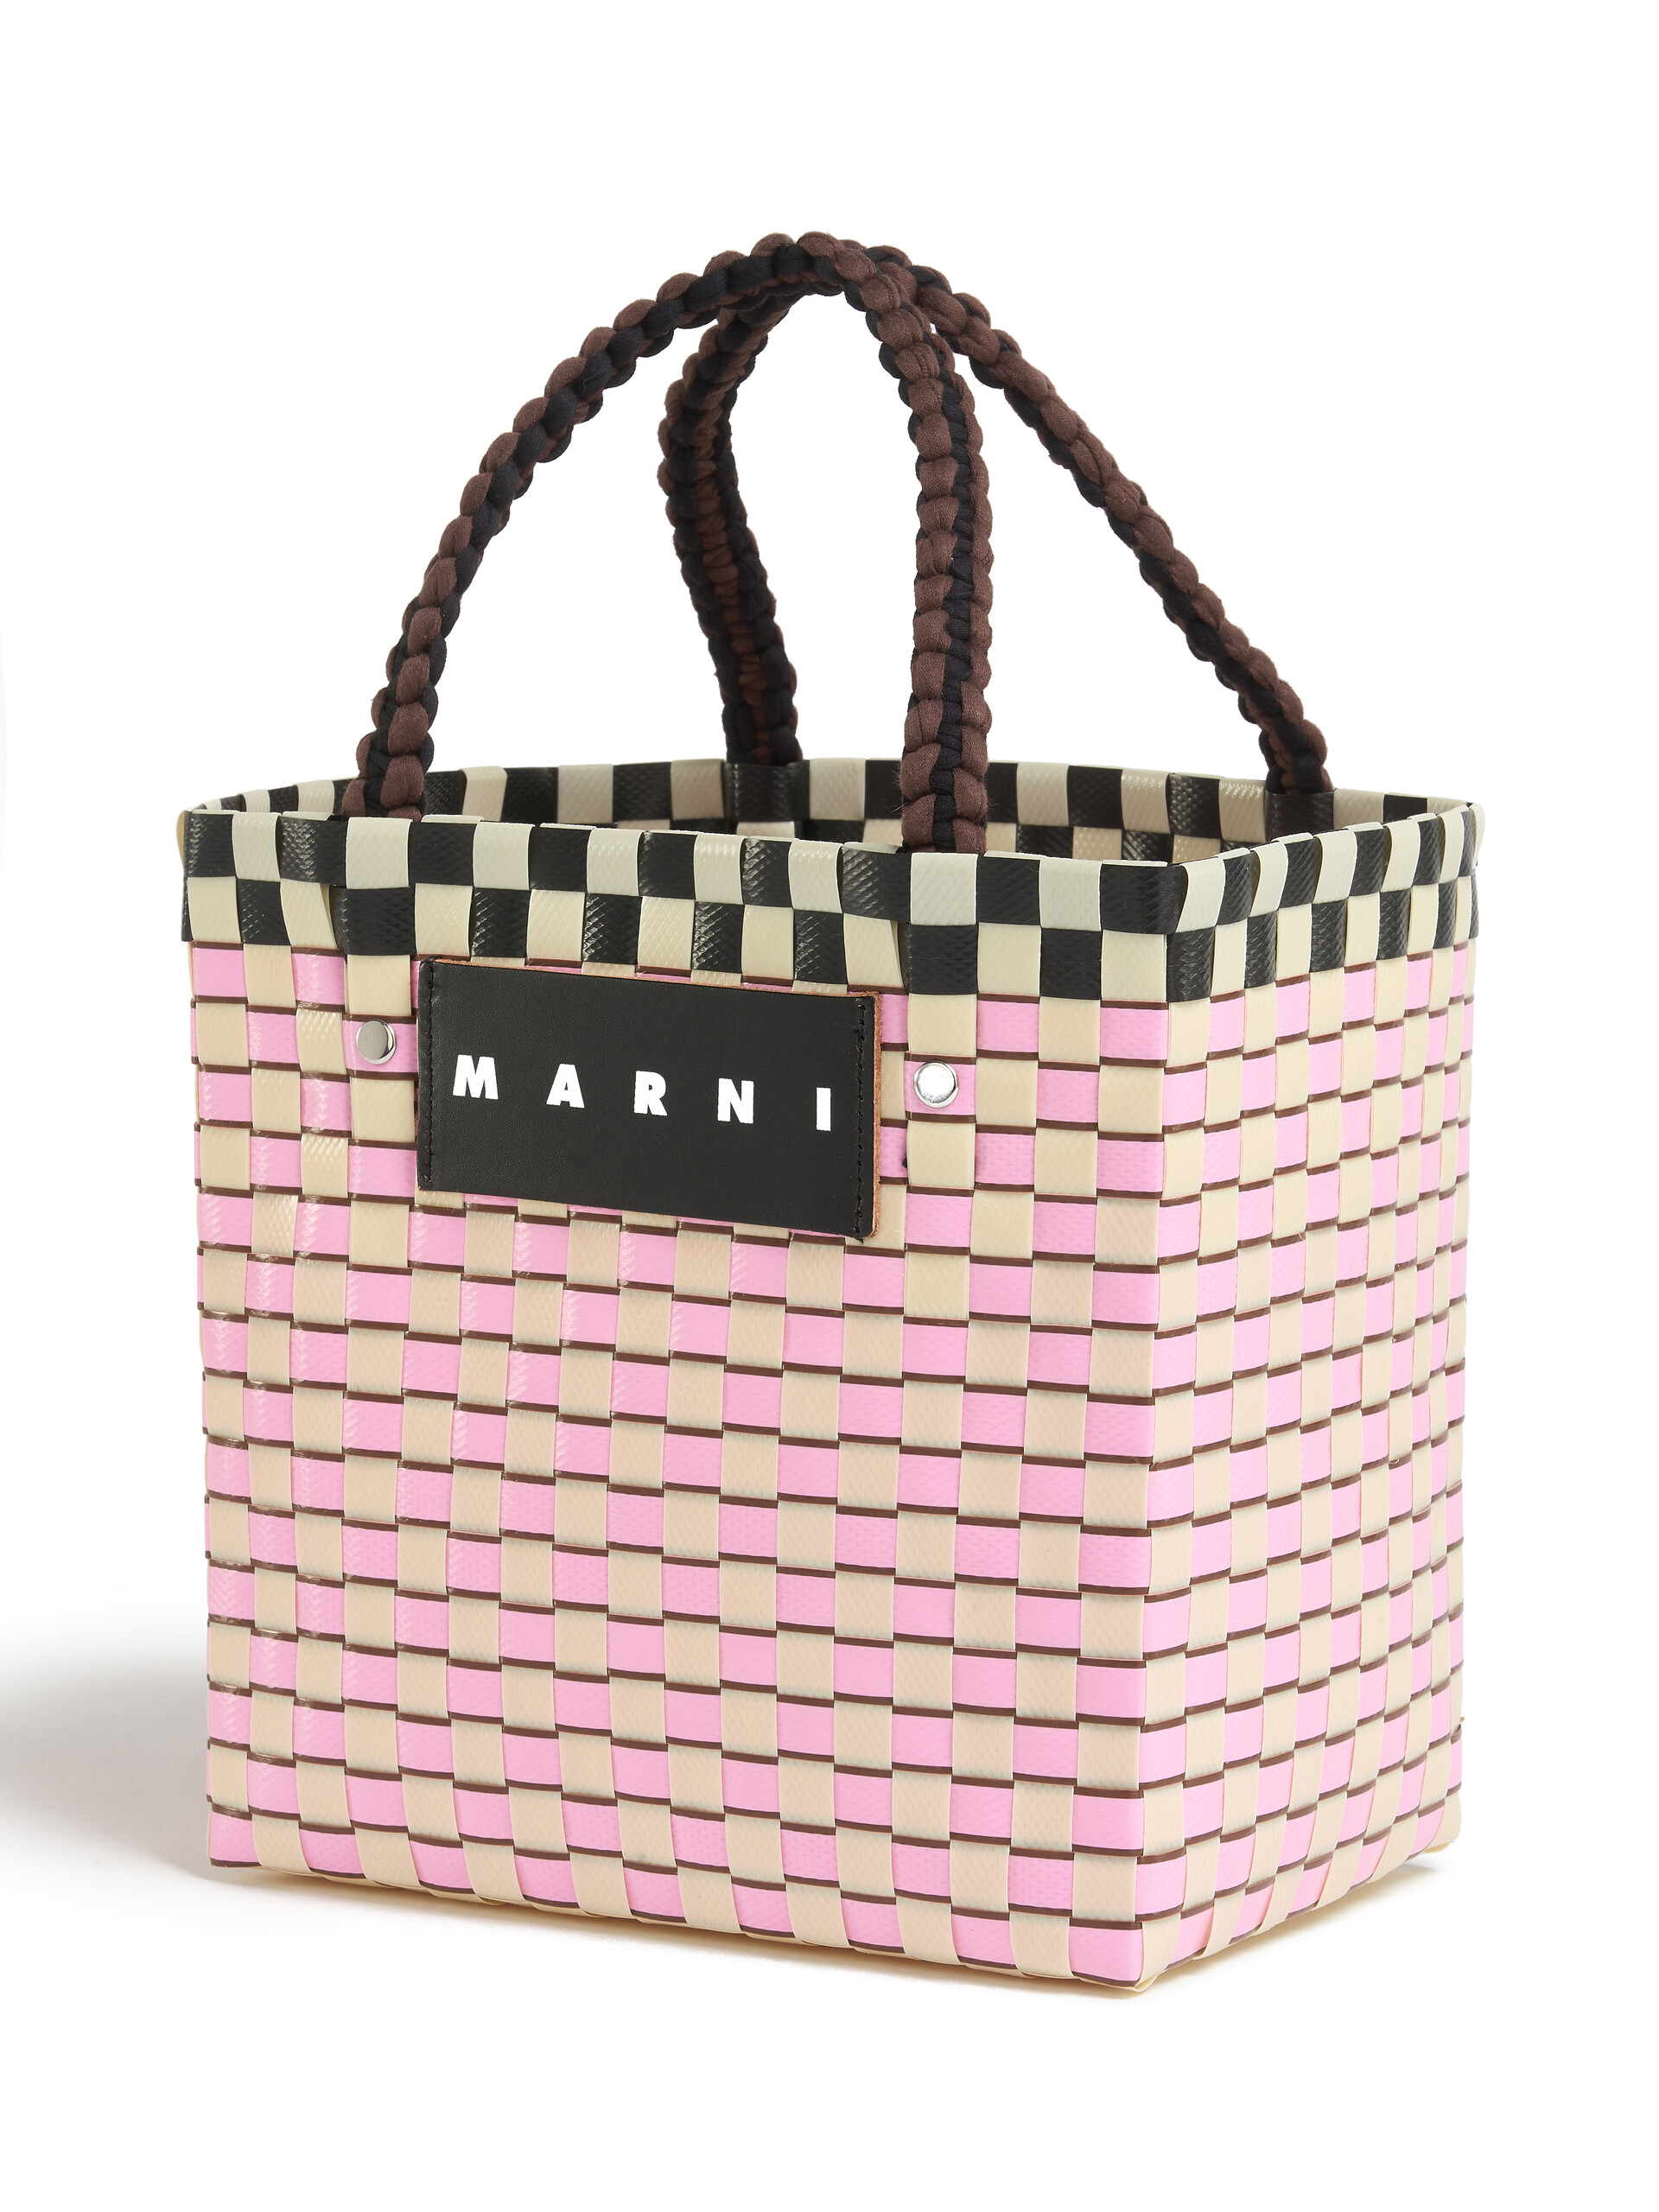 MARNI MARKET shopping bag in pink woven material with M logo